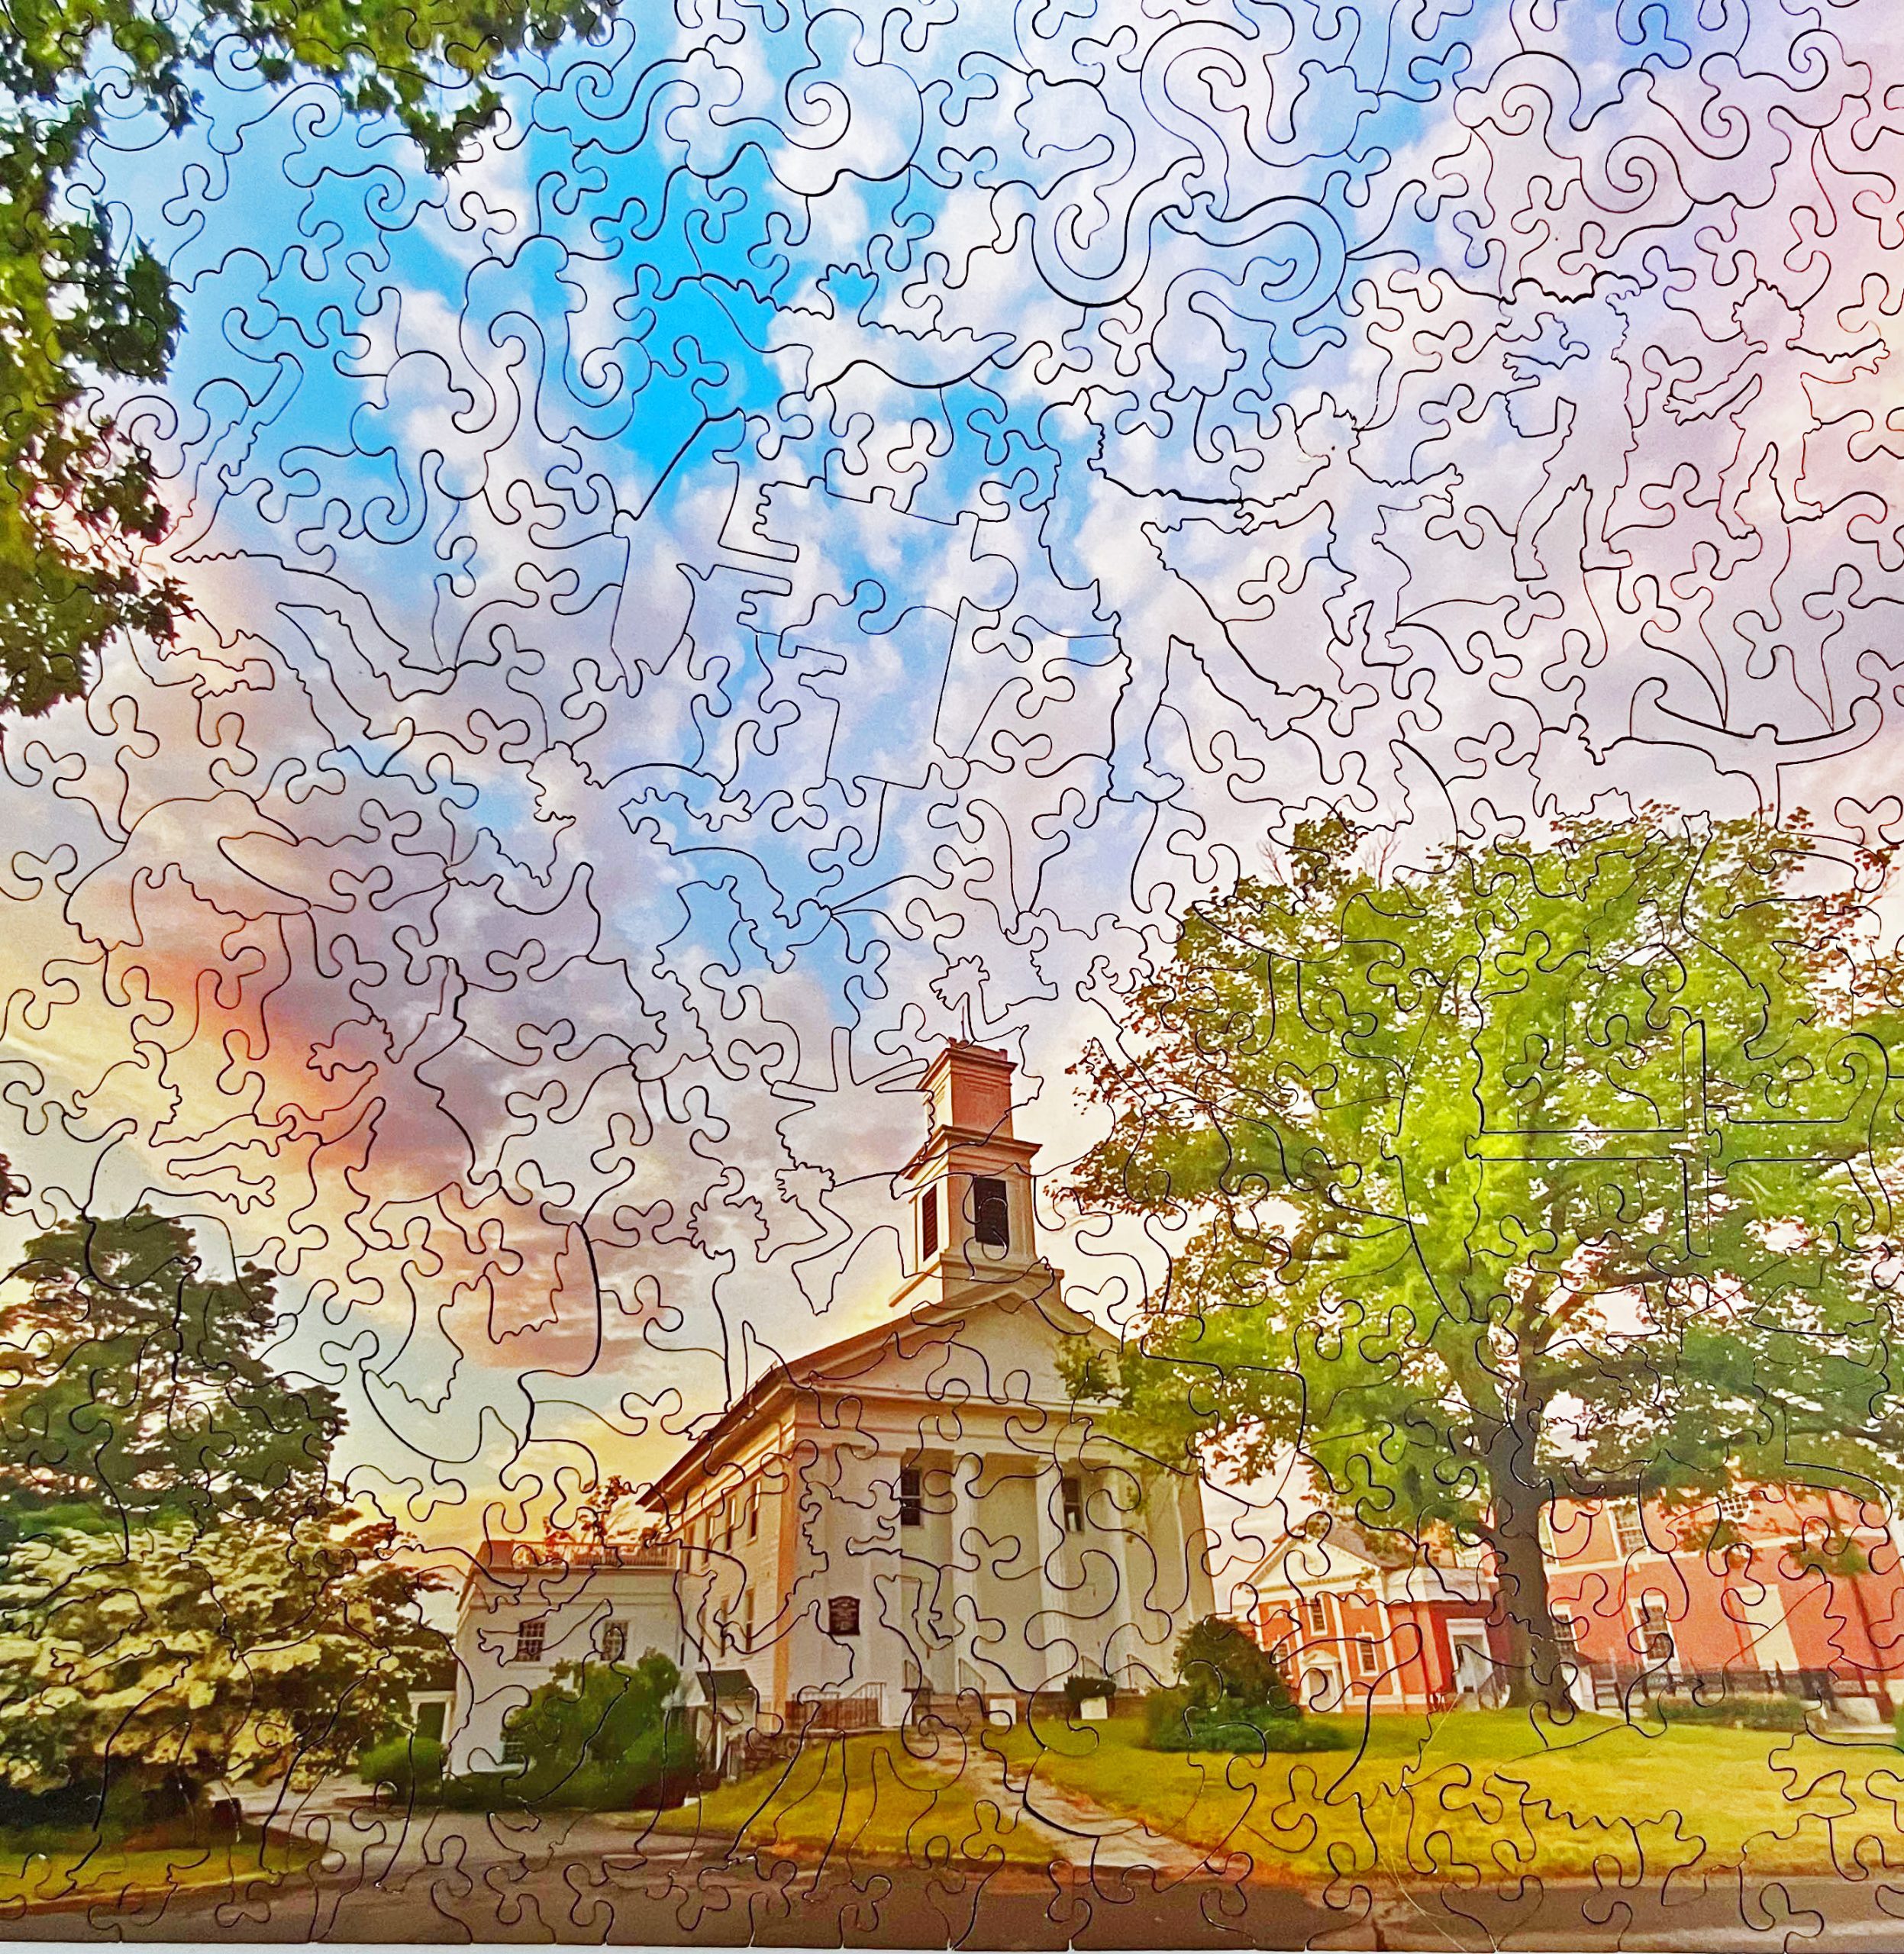 Order your 2022 MCC Liberty Puzzle here by Sept. 25 to have it in time for Christmas!